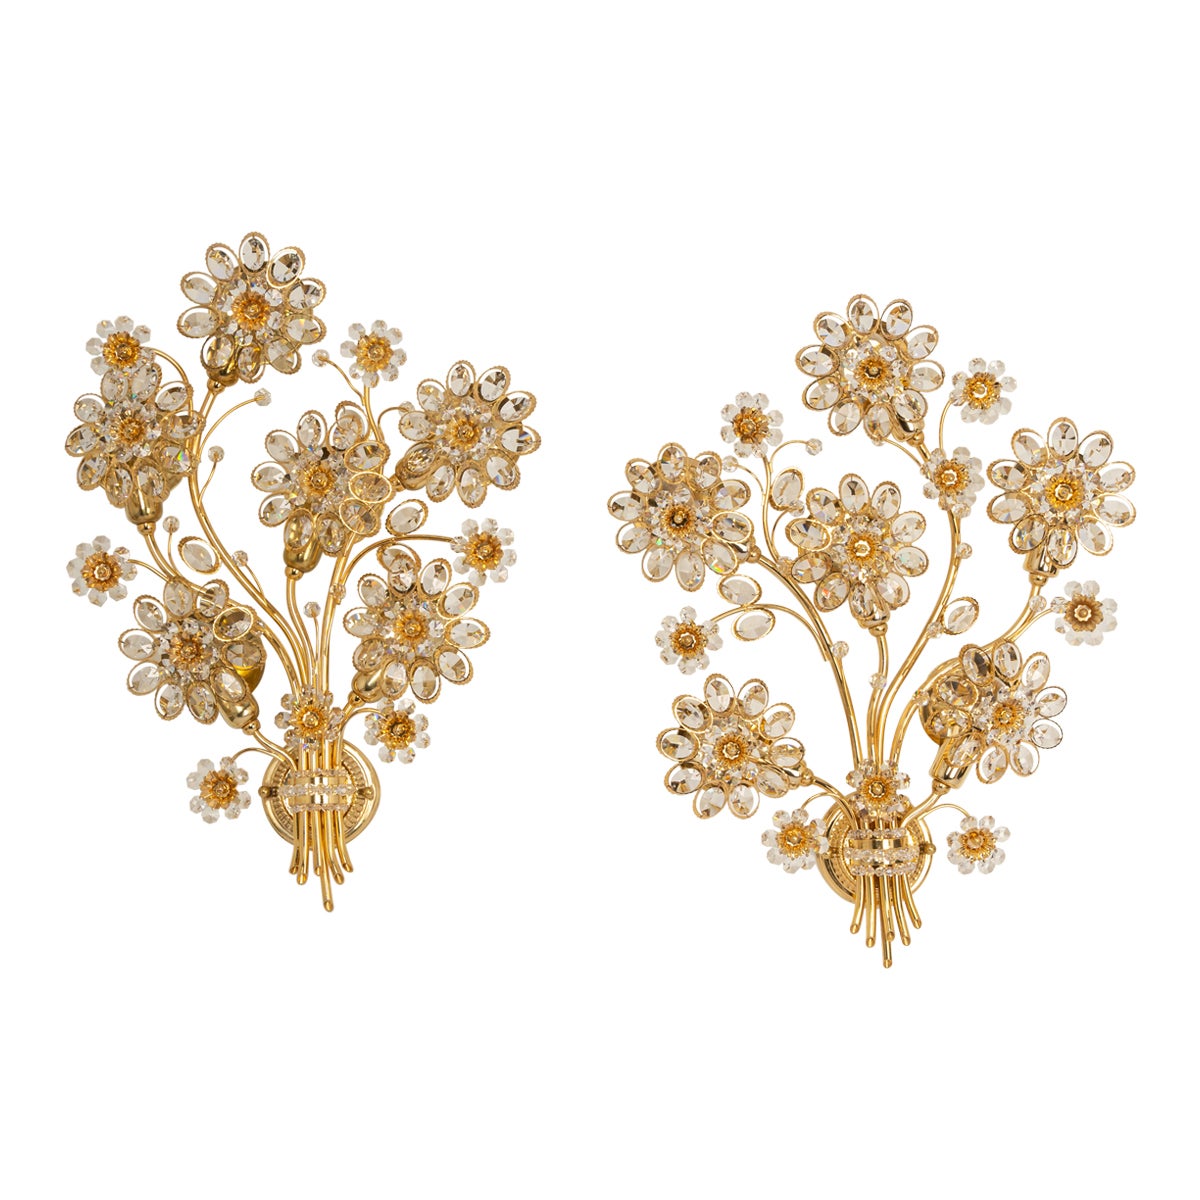 Pair of Large Gilt Brass Flower Shape Wall Lights by Palwa, Germany, 1970s